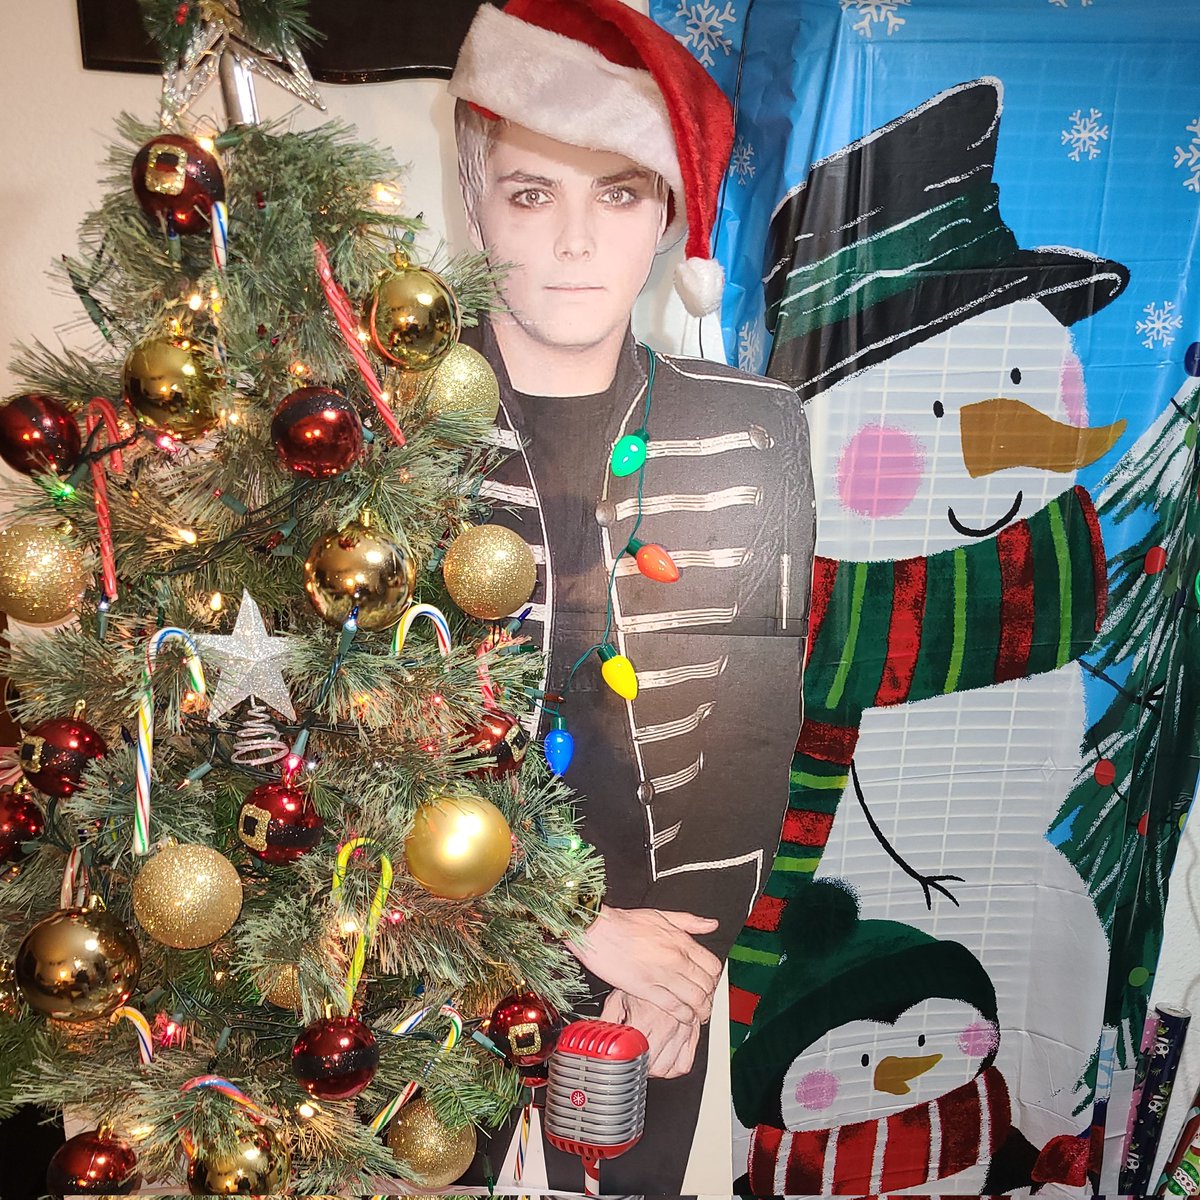 I dont care what my family says @gerardway belongs by the Christmas tree..he is THE STAR 🥲
#chrismas #gerardway #mychemicalromance #theblackparade